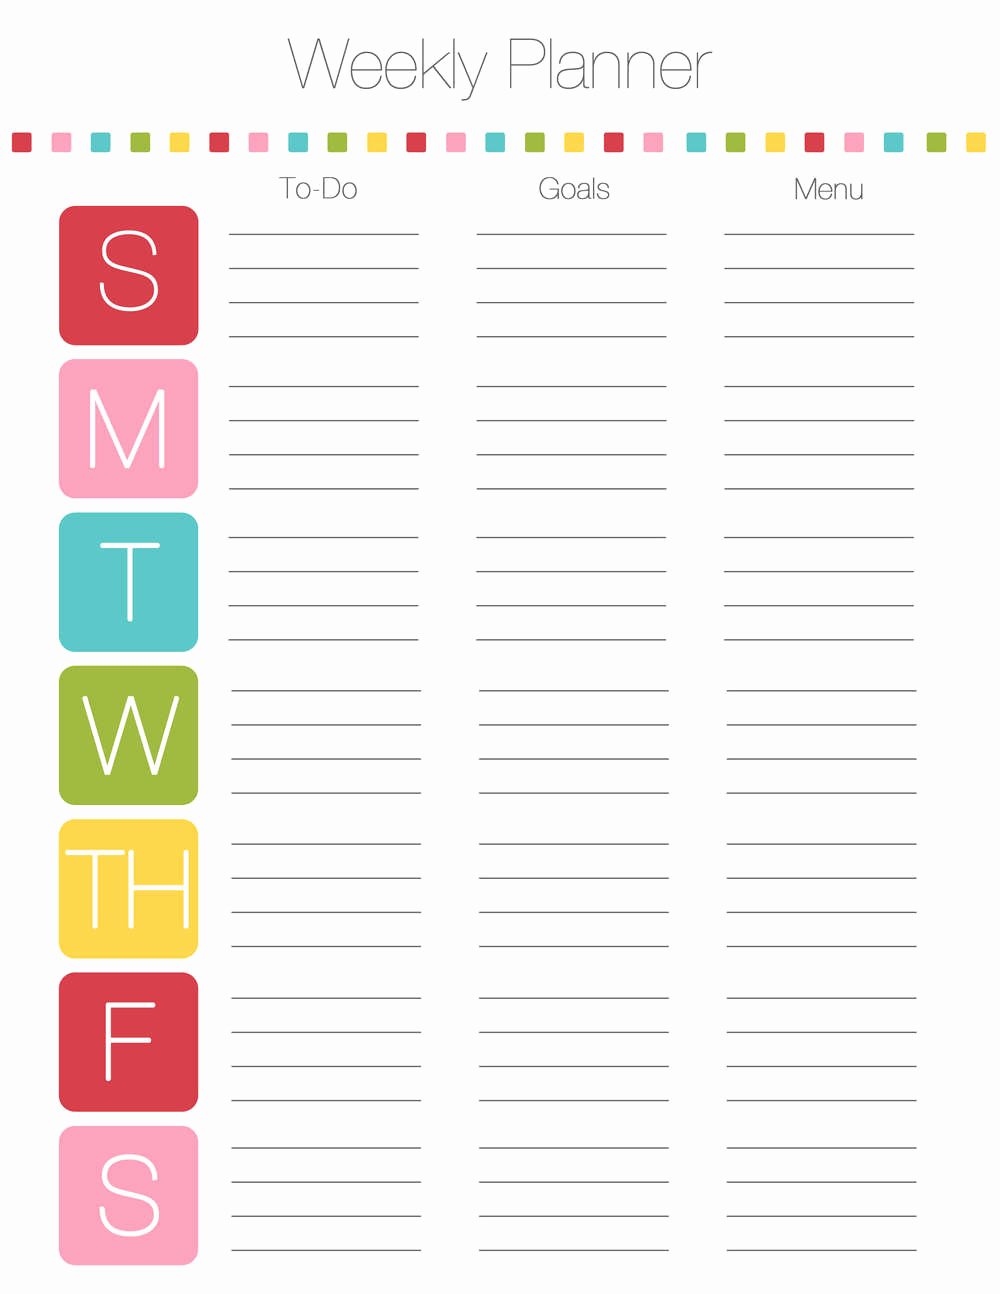 Week Day Schedule Template Elegant Newsletter Free Printables I Heart Nap Time